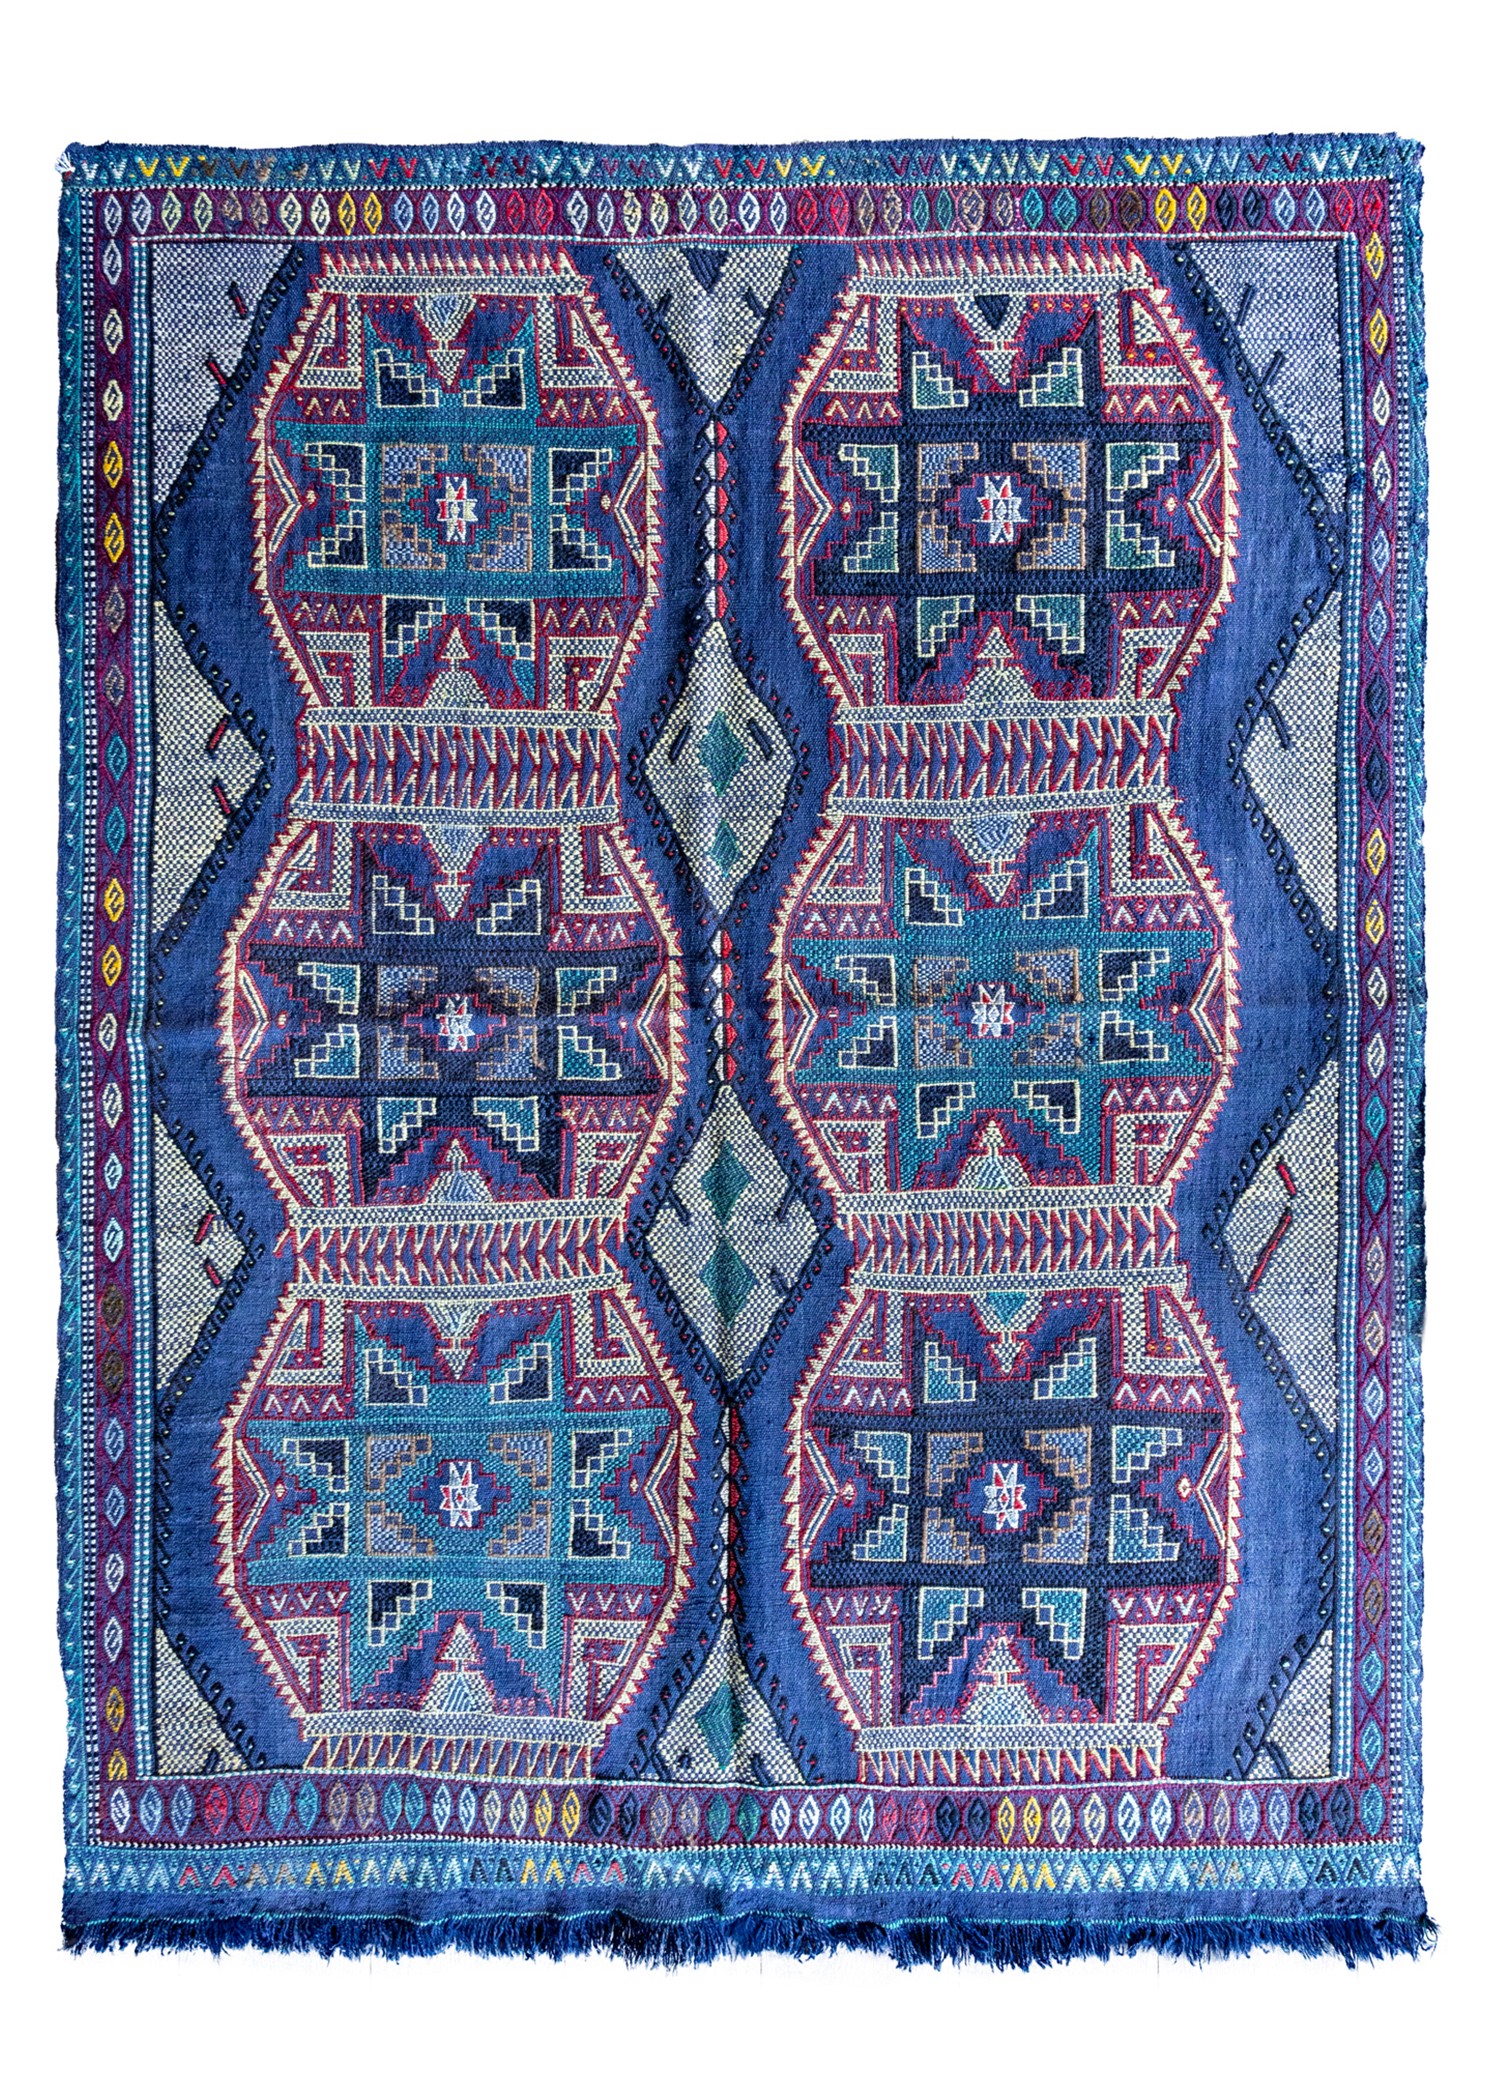 Sara Star Patterned Hand Woven Cicim Wool Rug 134x178 cm